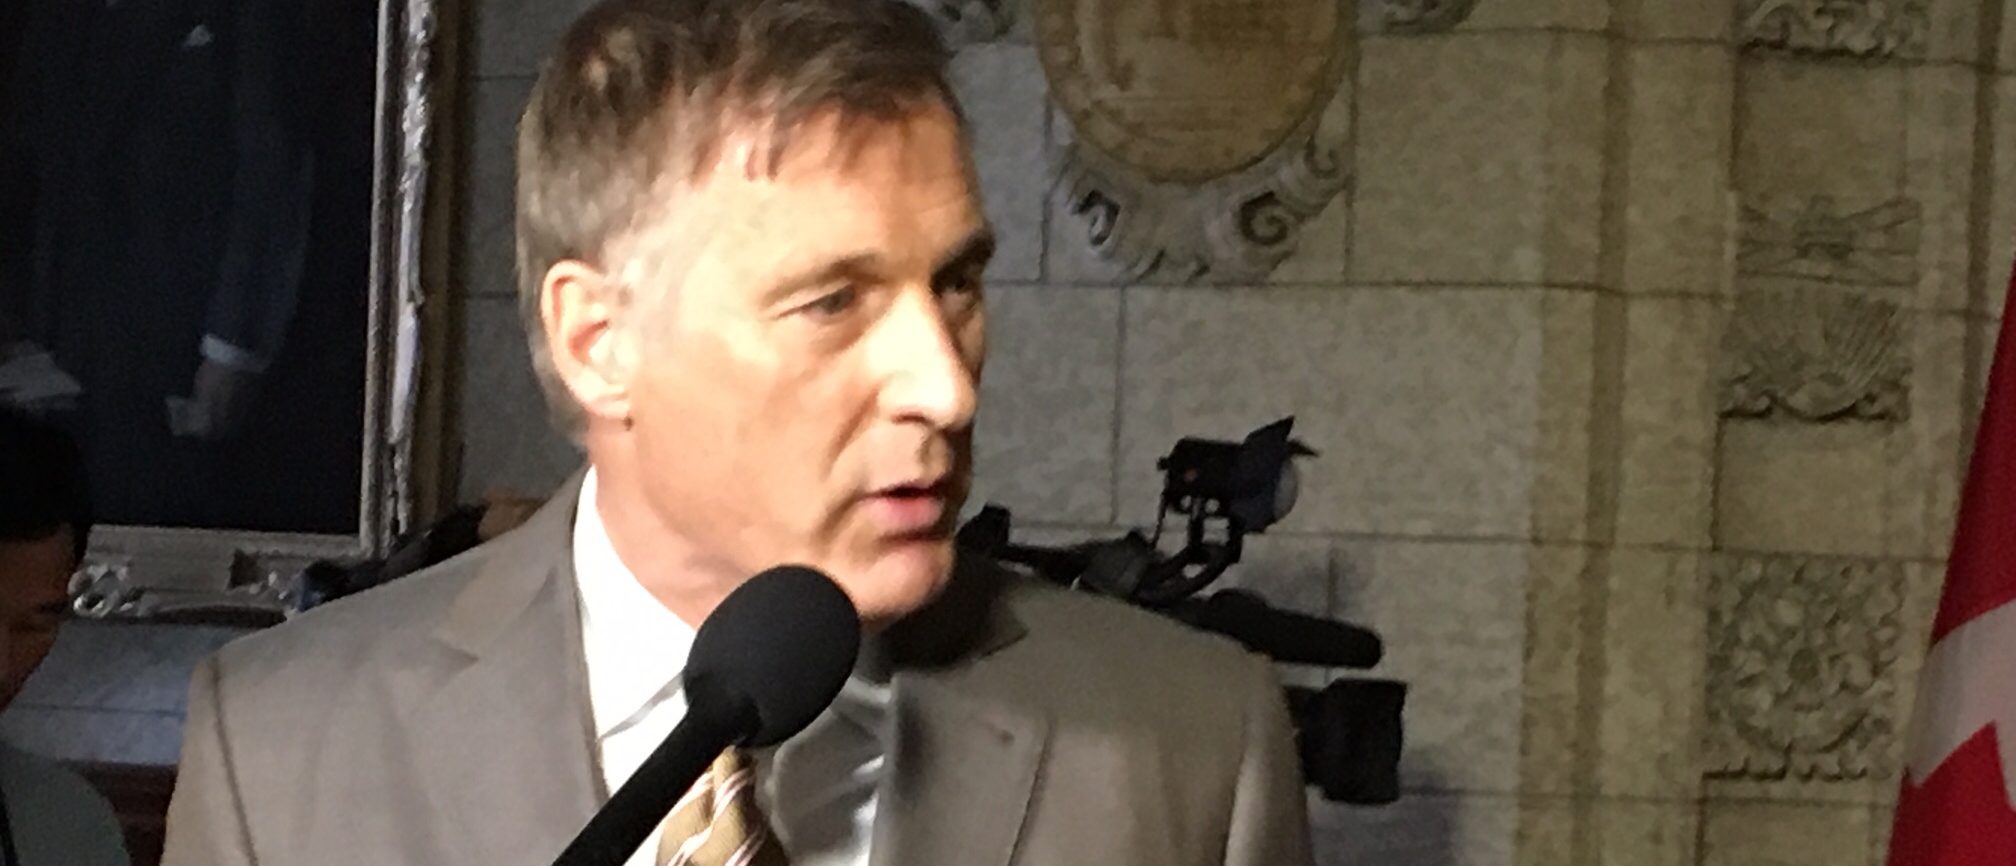 People's Party of Canada Leader Maxime Bernier speaks to reporters at the House of Commons foyer in Ottawa, Oct. 1, 2018. (Photo: The Daily Caller/David Krayden)